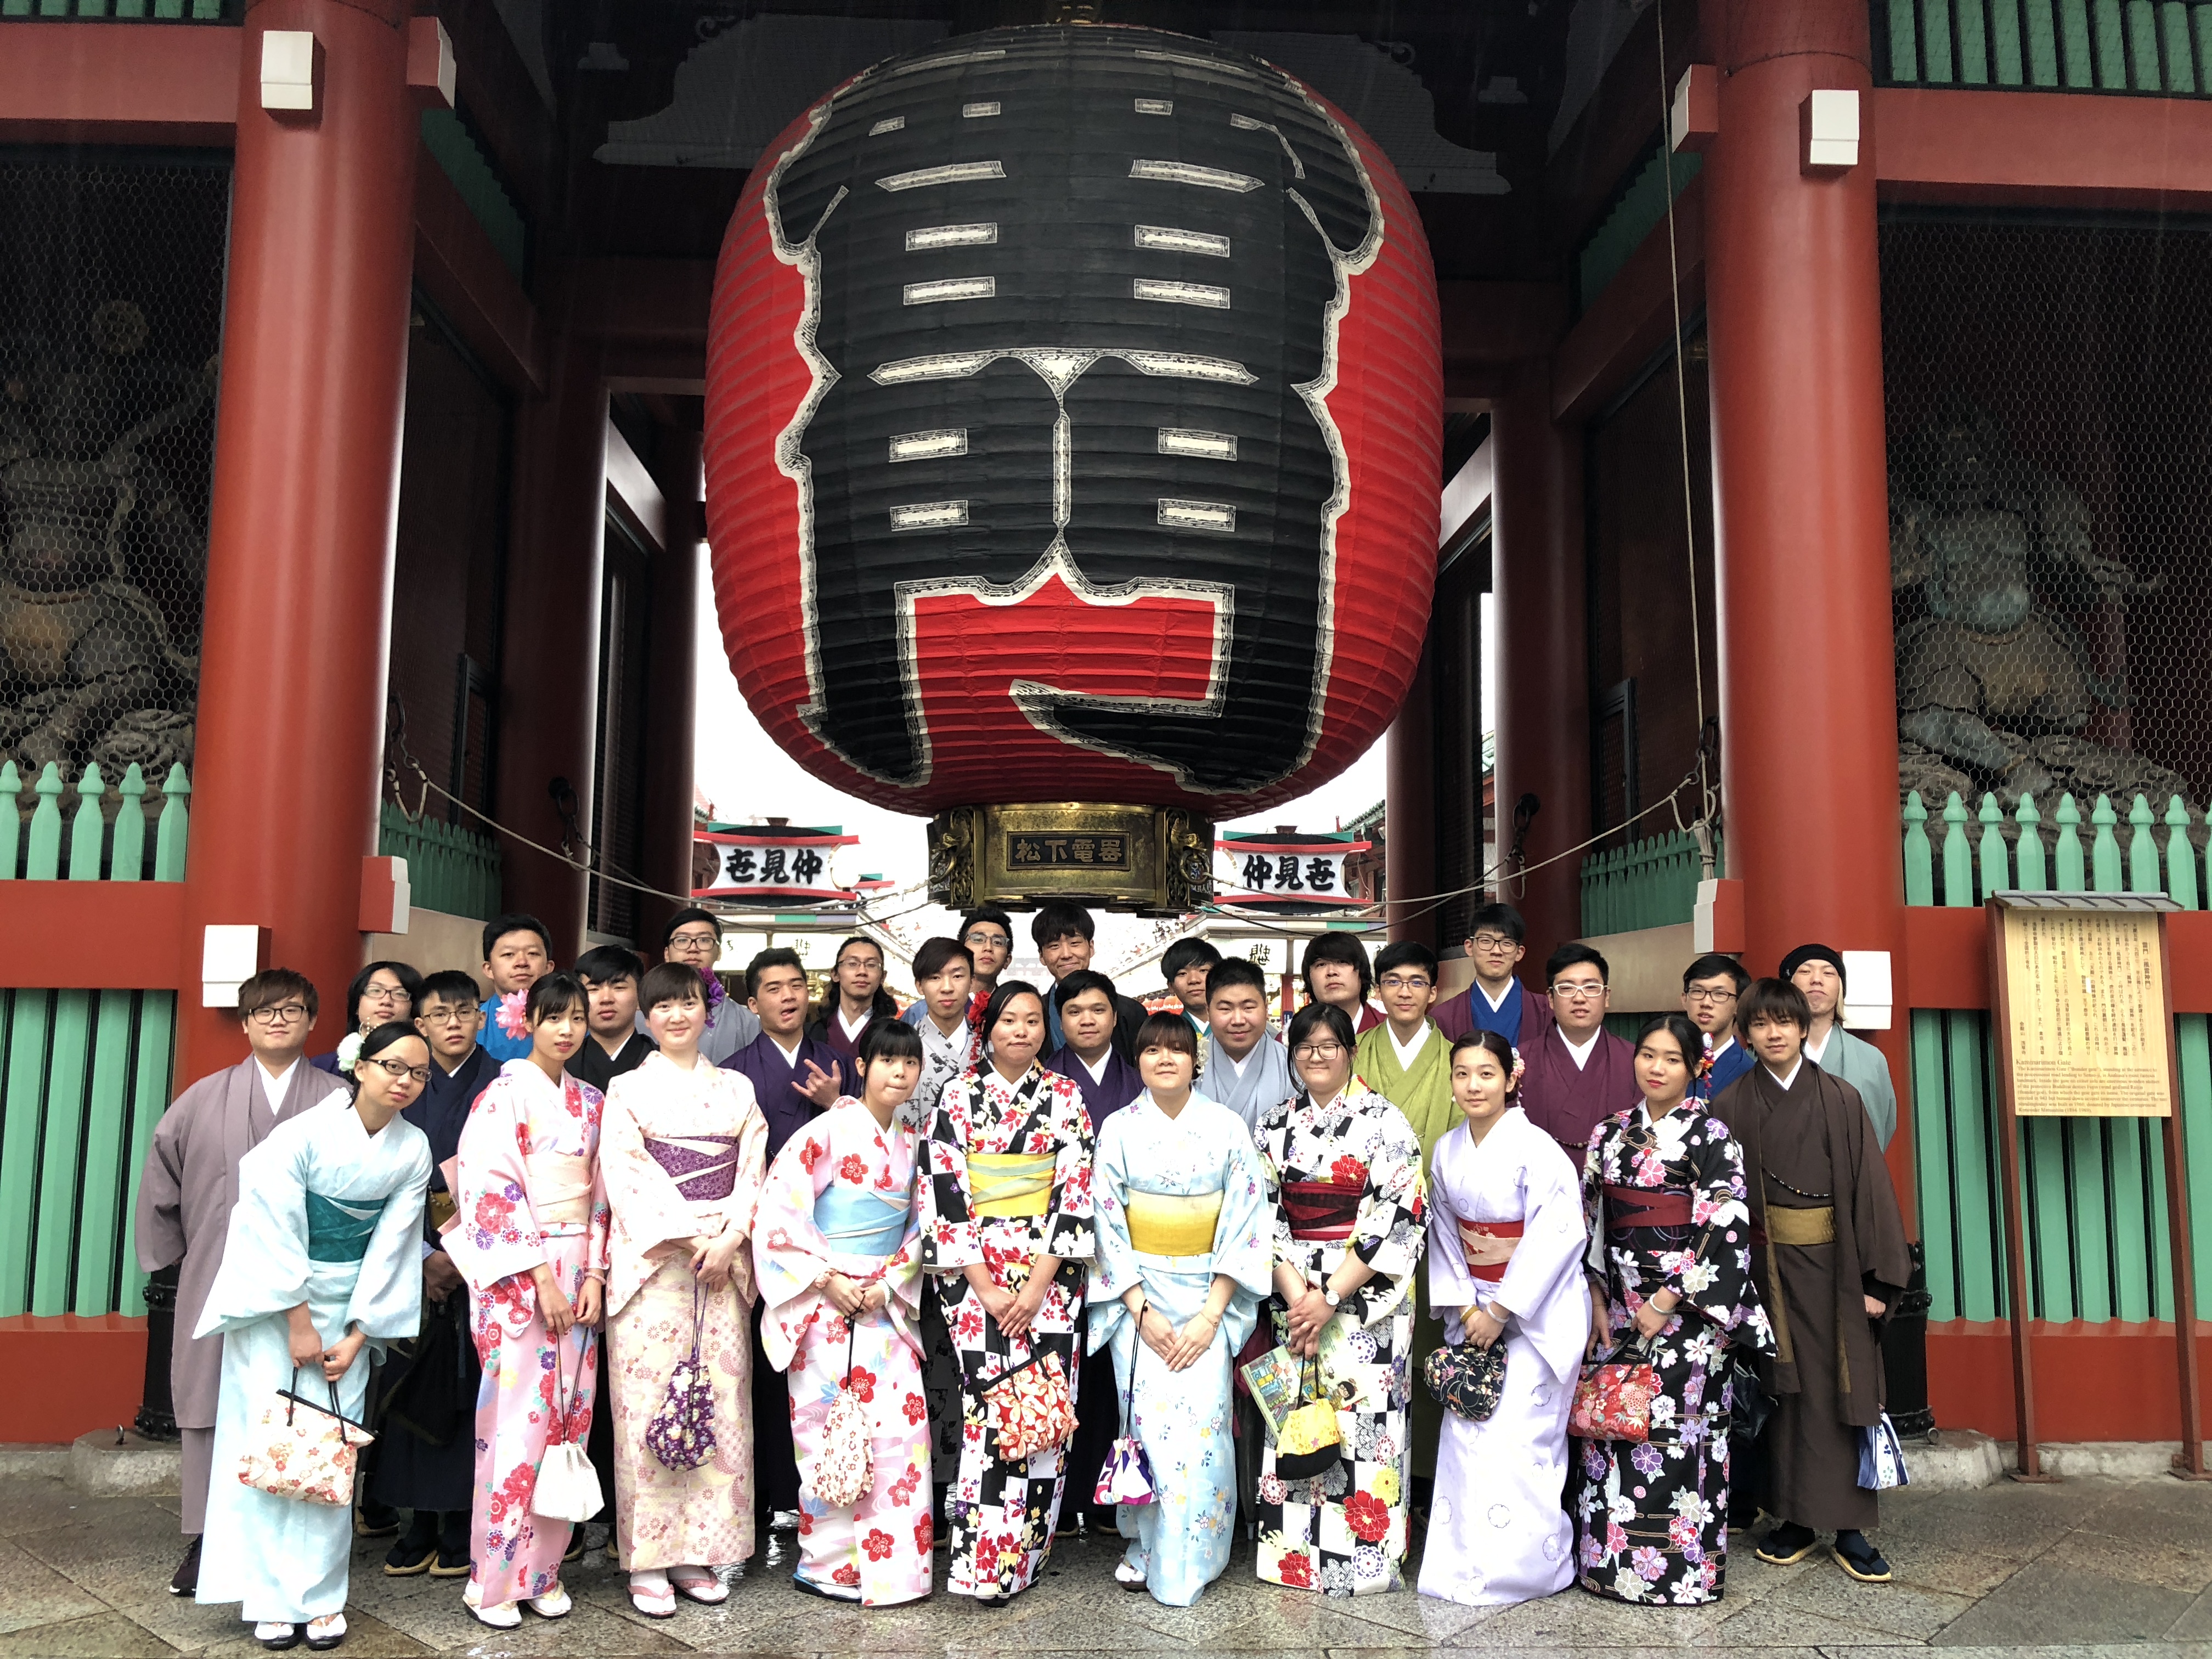 Students will understand Japanese traditional culture and customs through visits to religiously significant shrines, wearing yukata, etc.